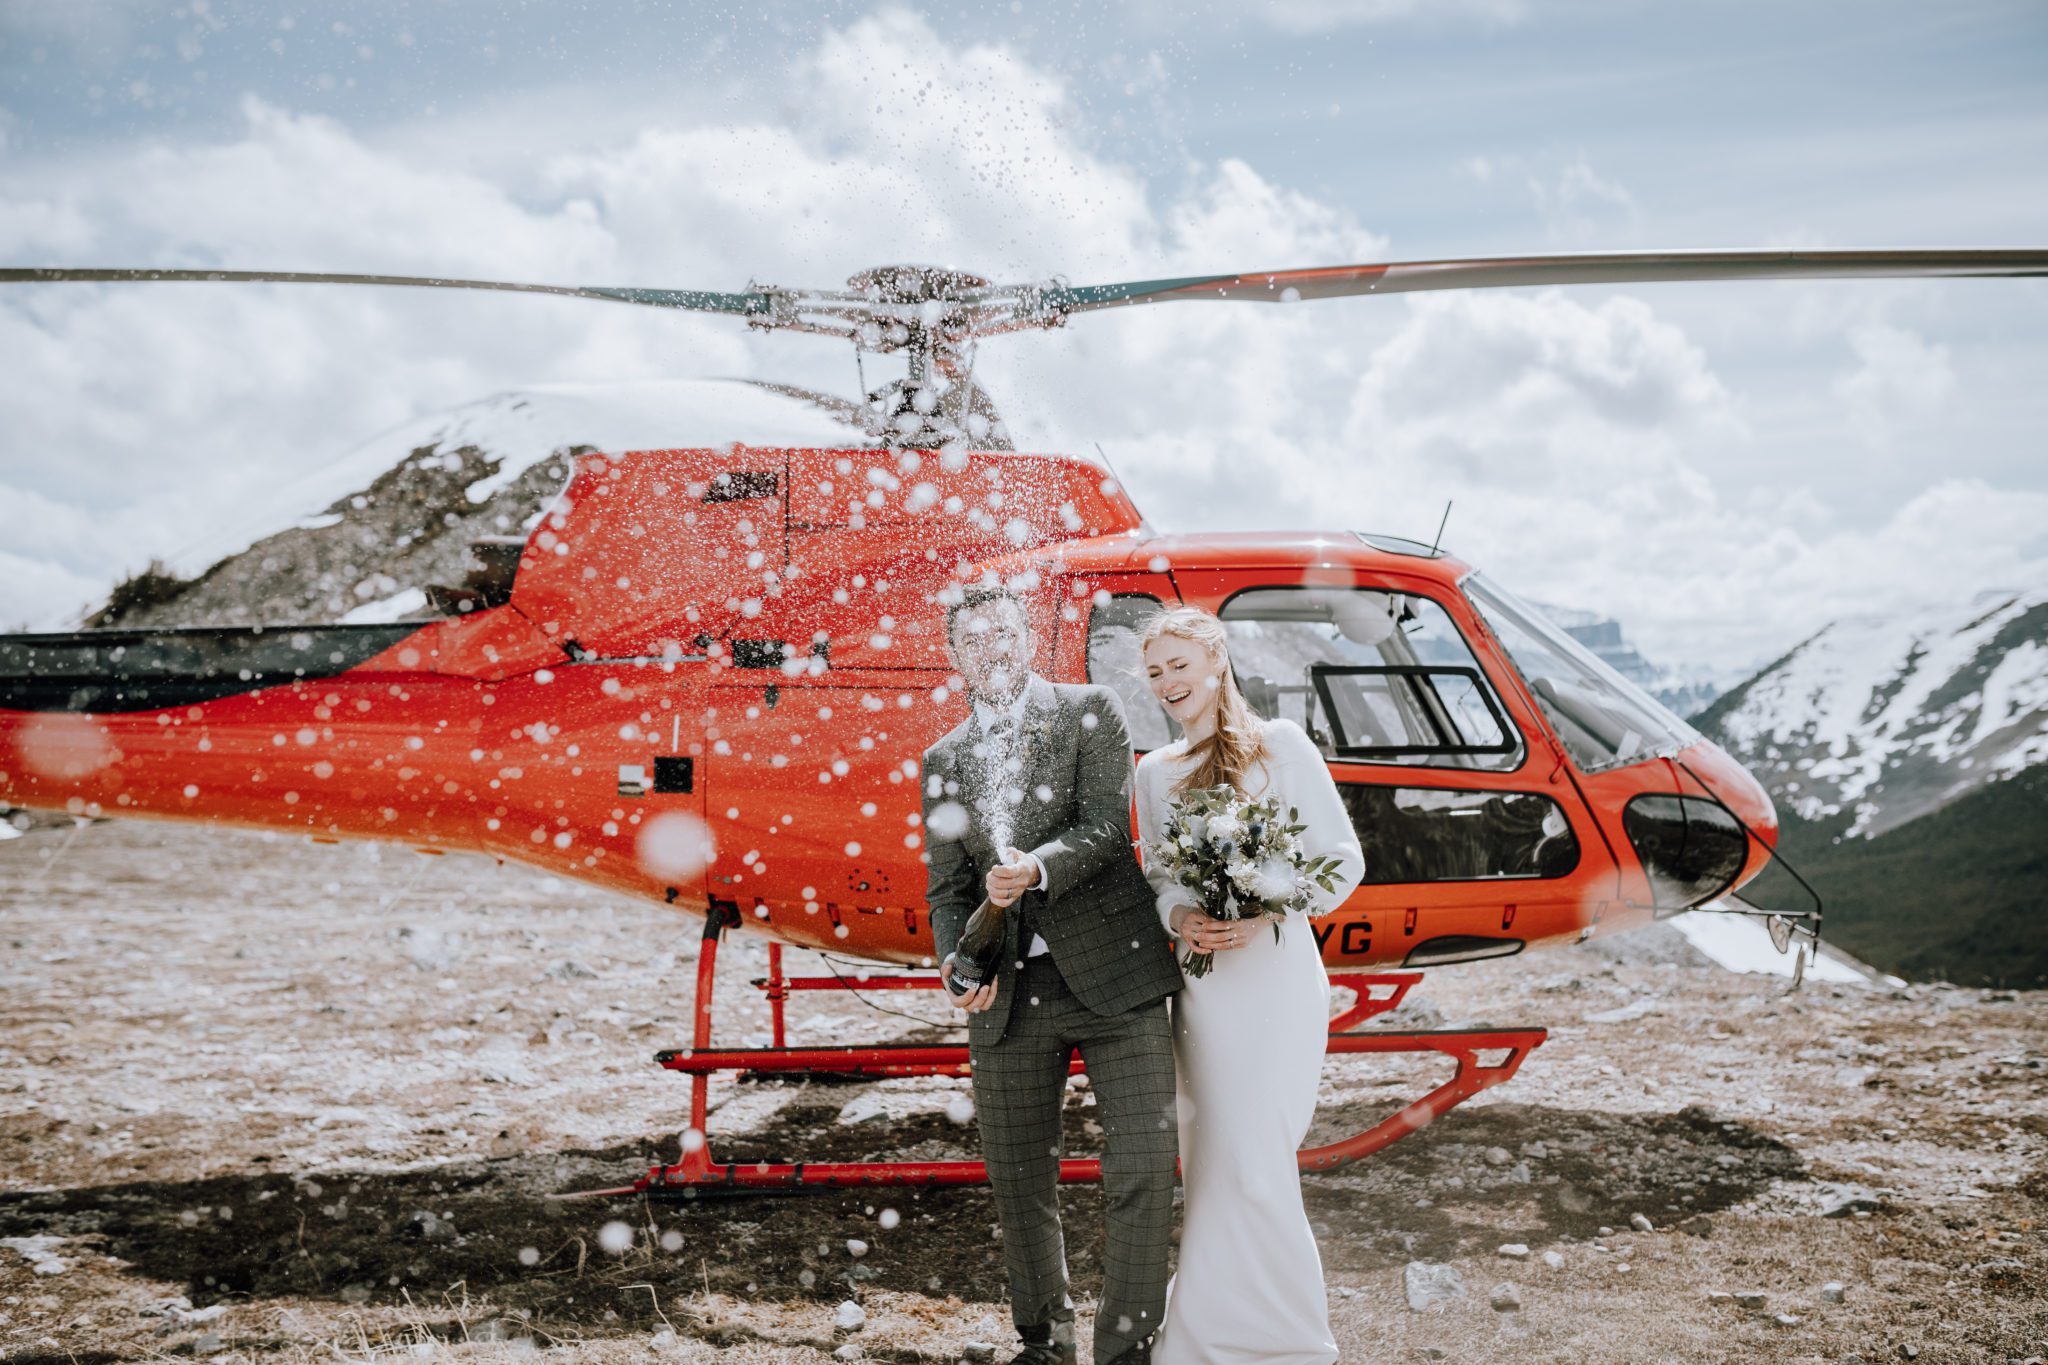 Champagne toast and helicopter tour for this adventure elopement